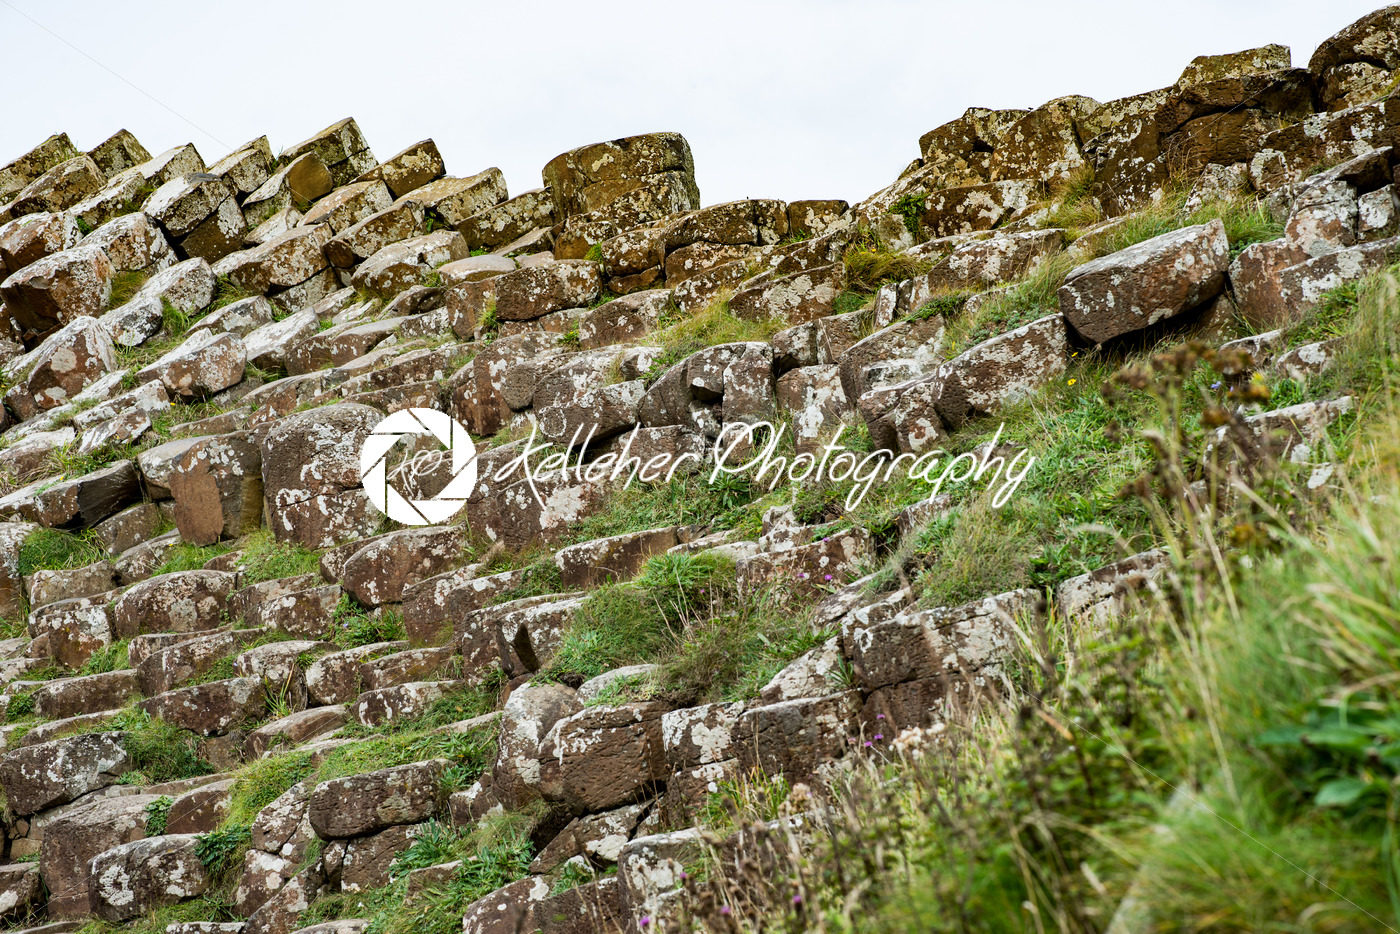 The Giant’s Causeway in County Antrim, Northern Ireland - Kelleher Photography Store